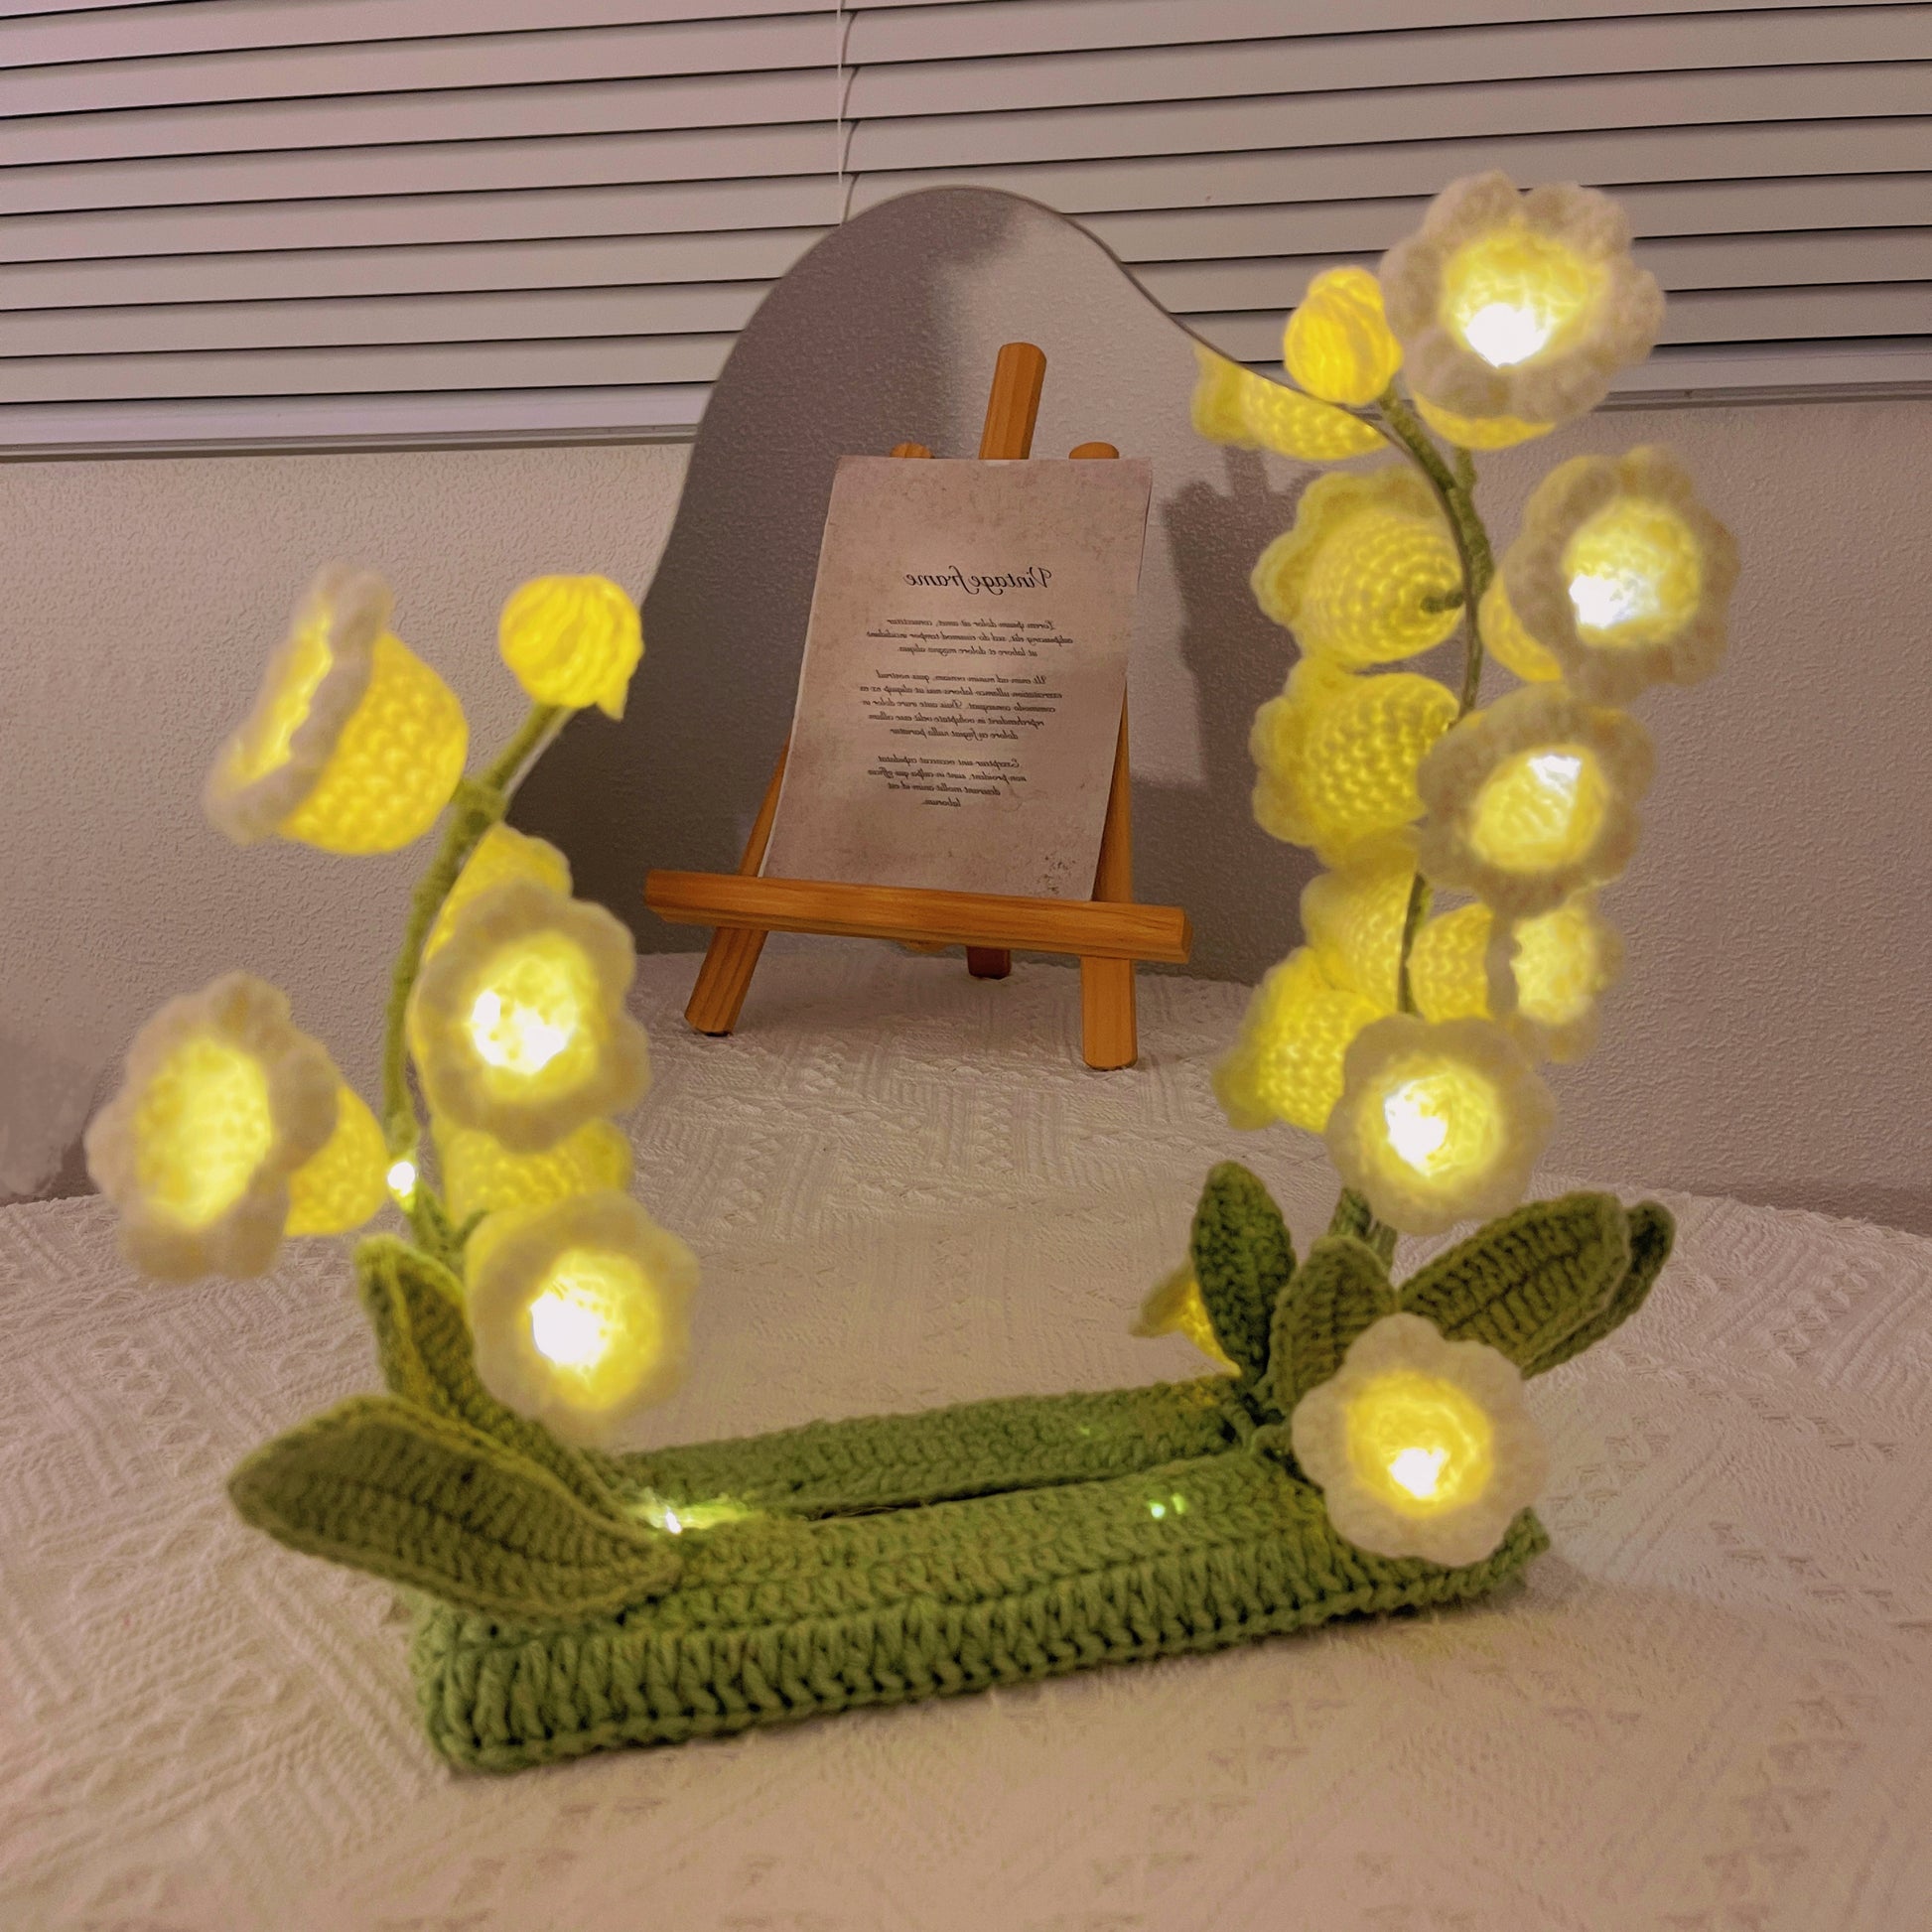 Blossom Reflections: Handcrafted Crochet Mirror Décor for Makeup, Gifts, Girls, Mother's Day Dressing Mirror Dormitory Gift for Her Valentines New Year College